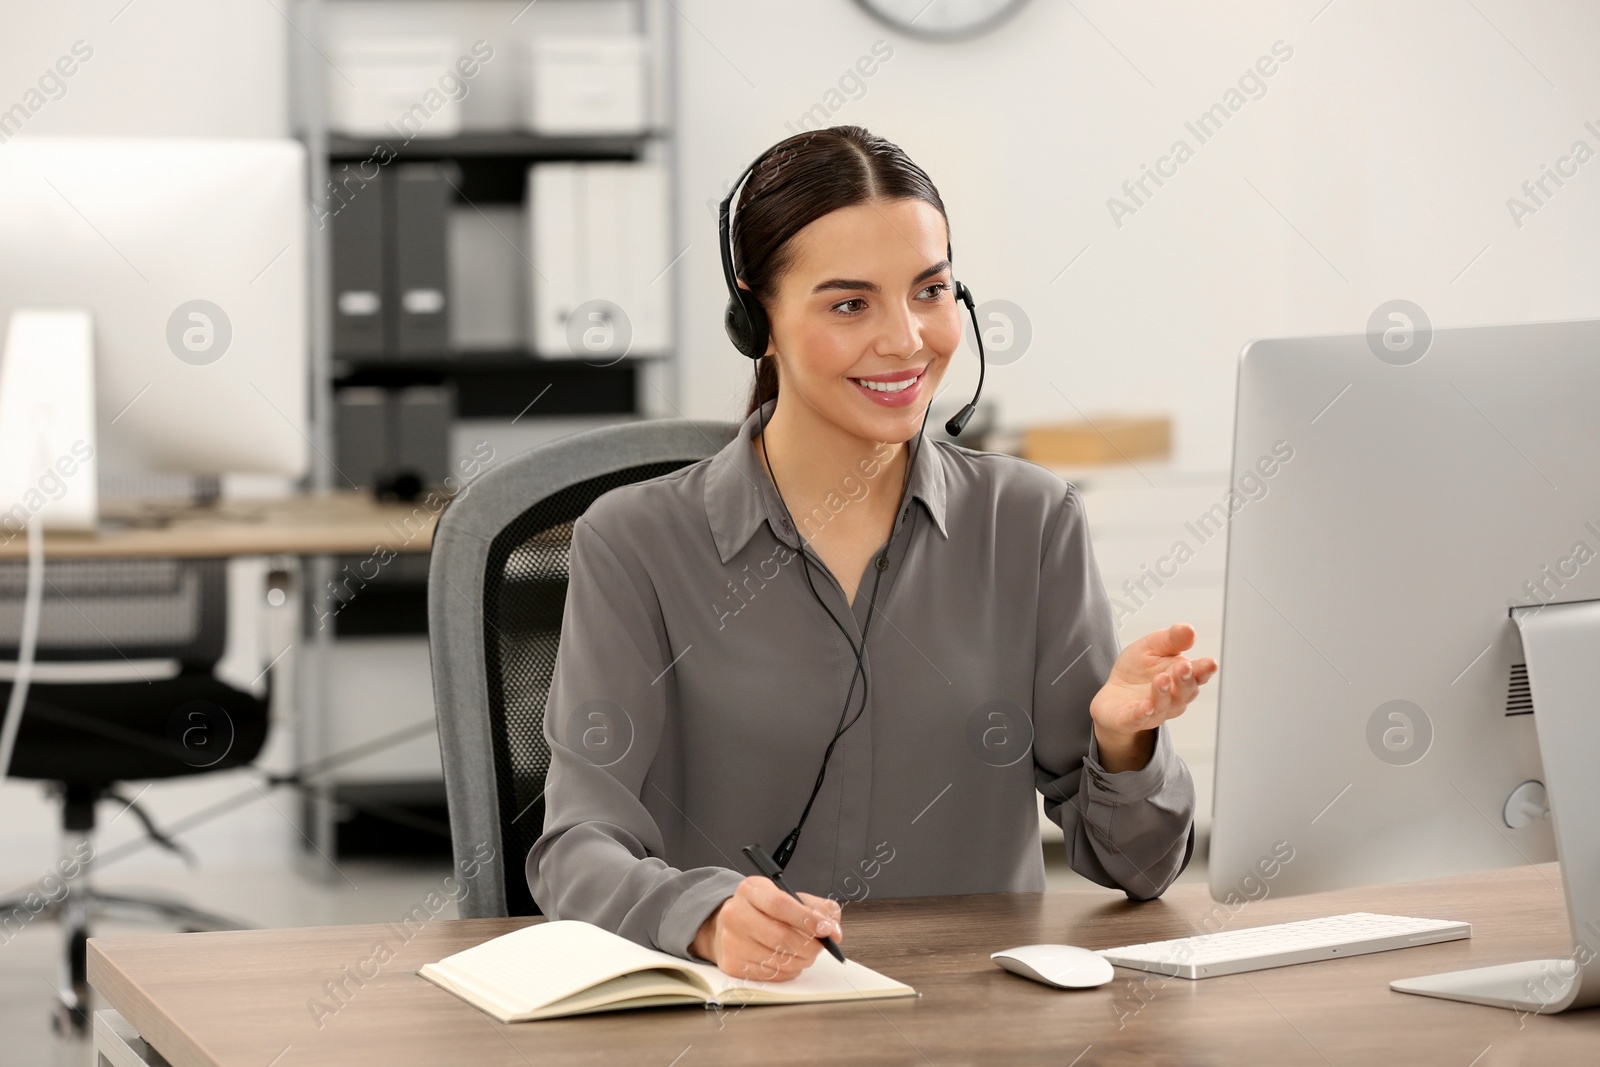 Photo of Hotline operator with headset working on computer in office